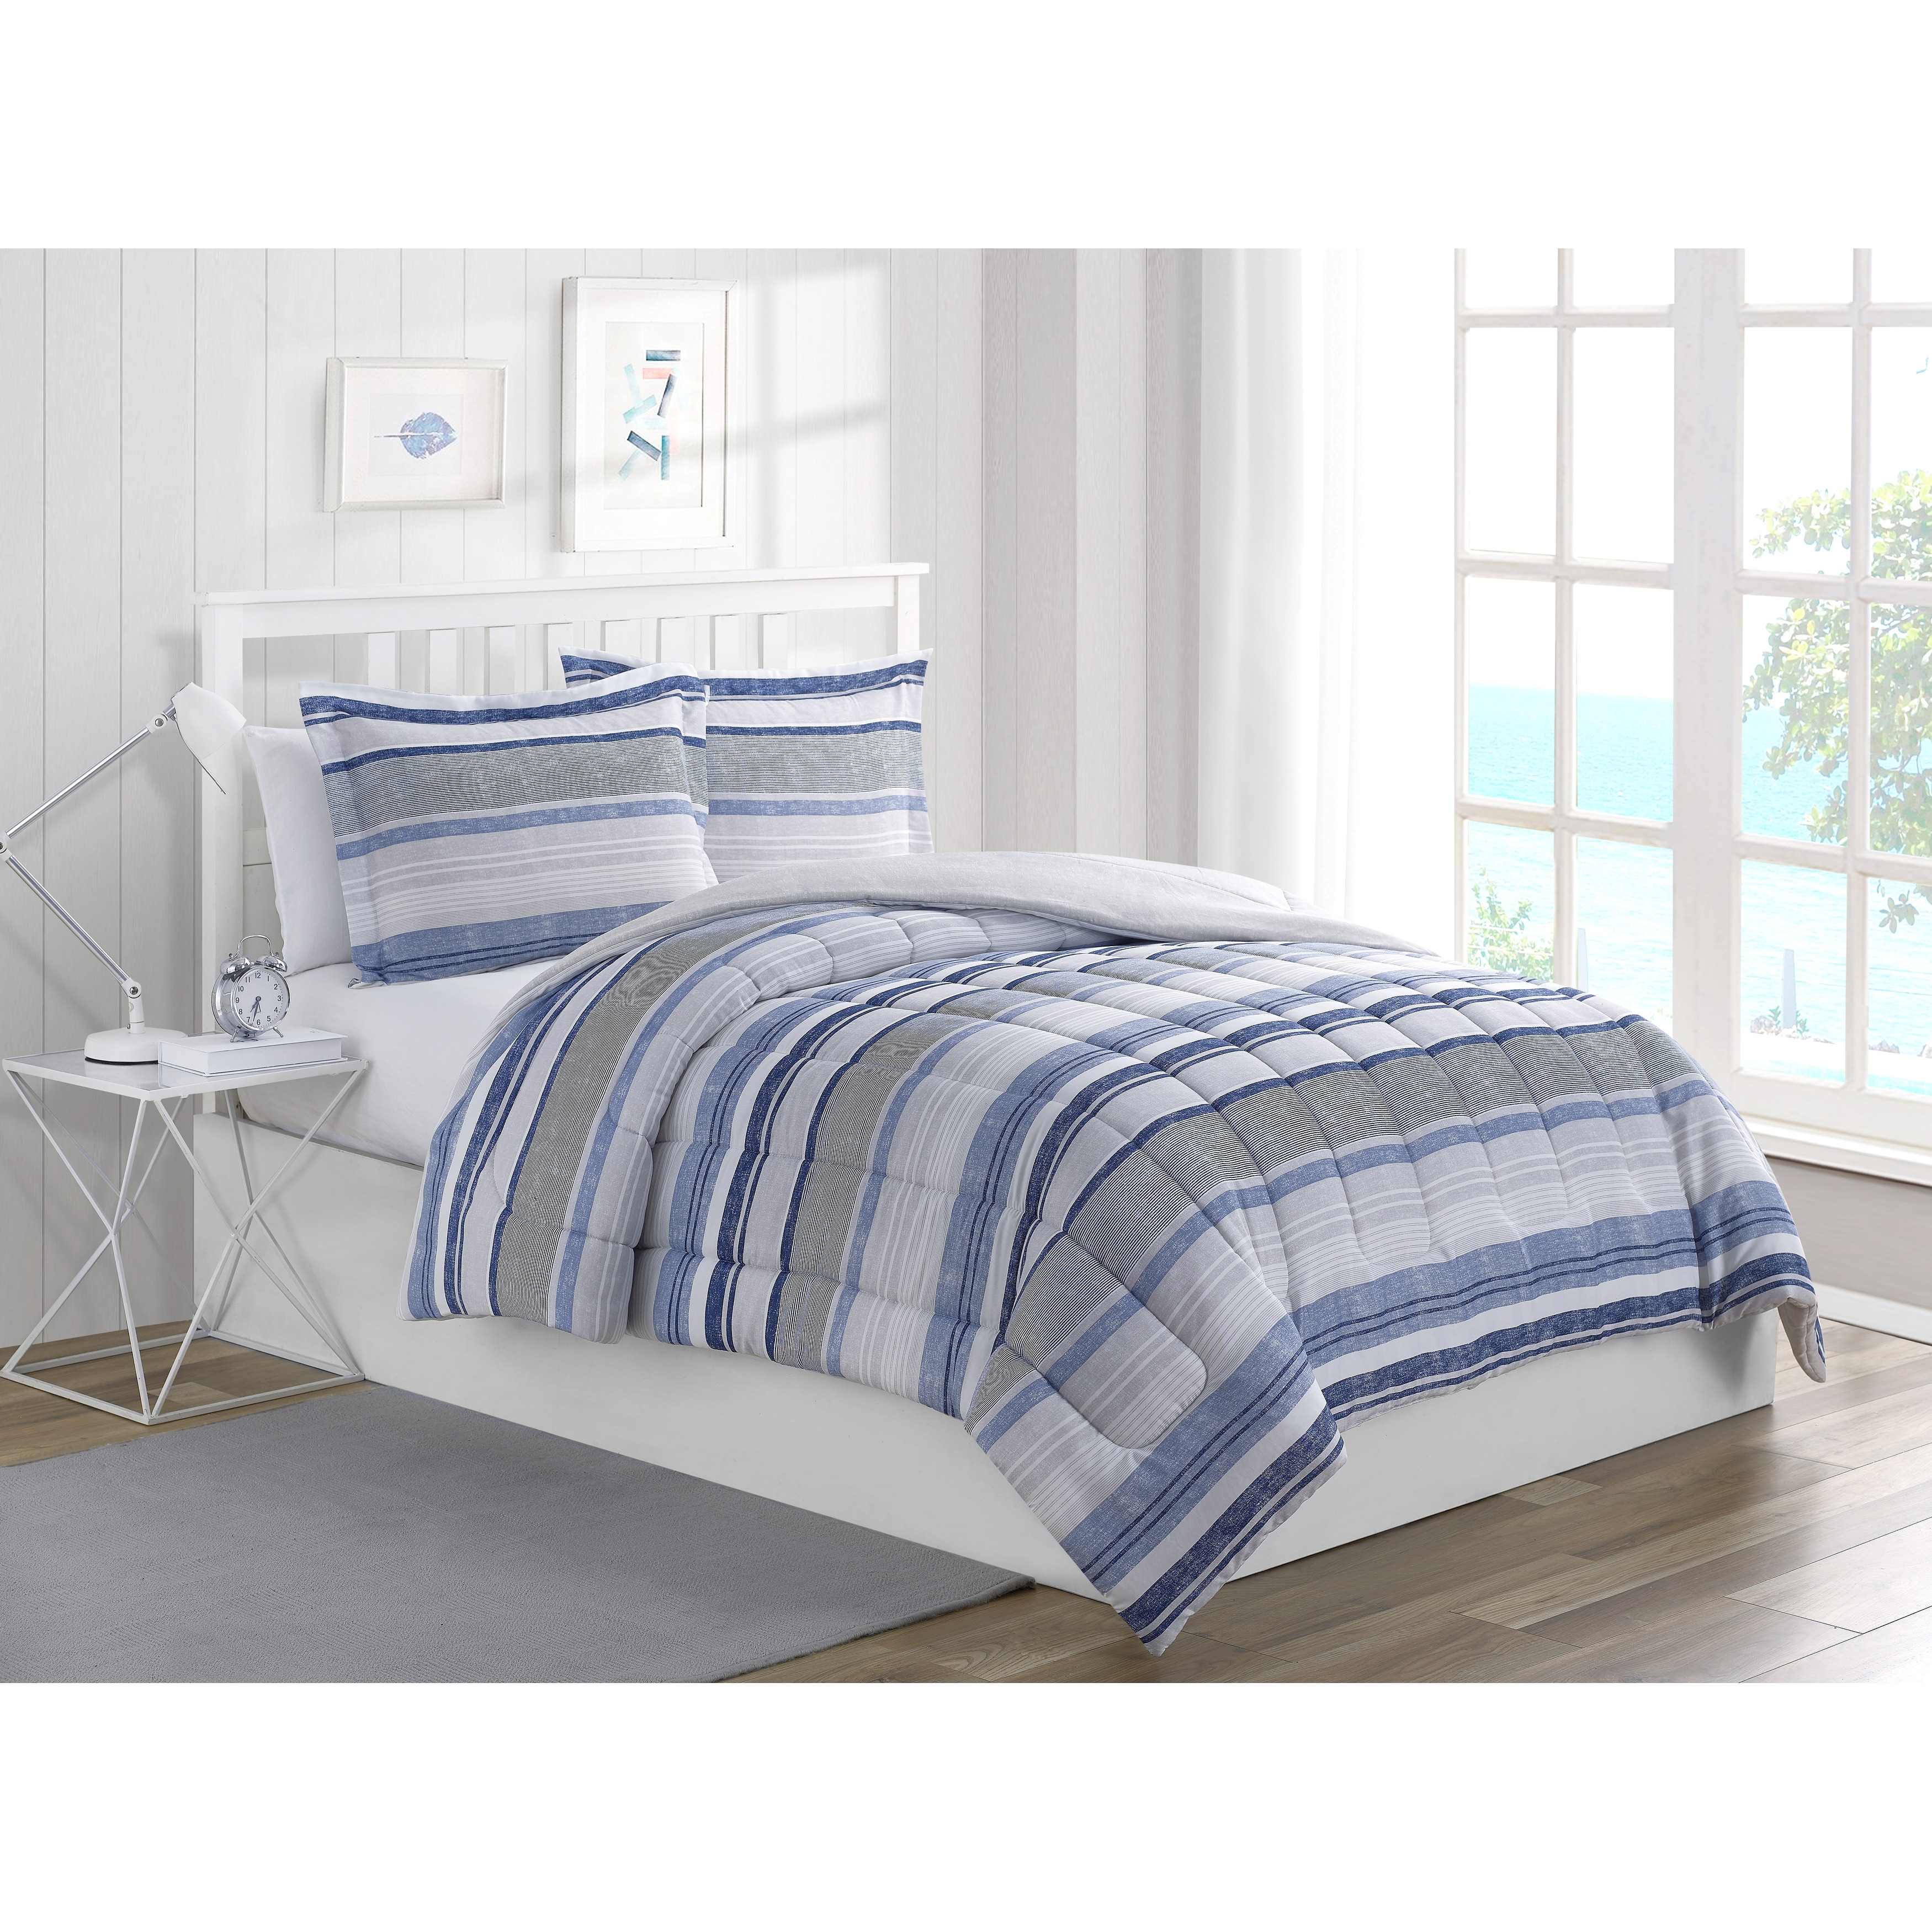 https://ak1.ostkcdn.com/images/products/is/images/direct/ee3691be0e465acf72dc559b19fe17f15d890001/Chase-Stripe-3-Piece-Comforter-Set.jpg